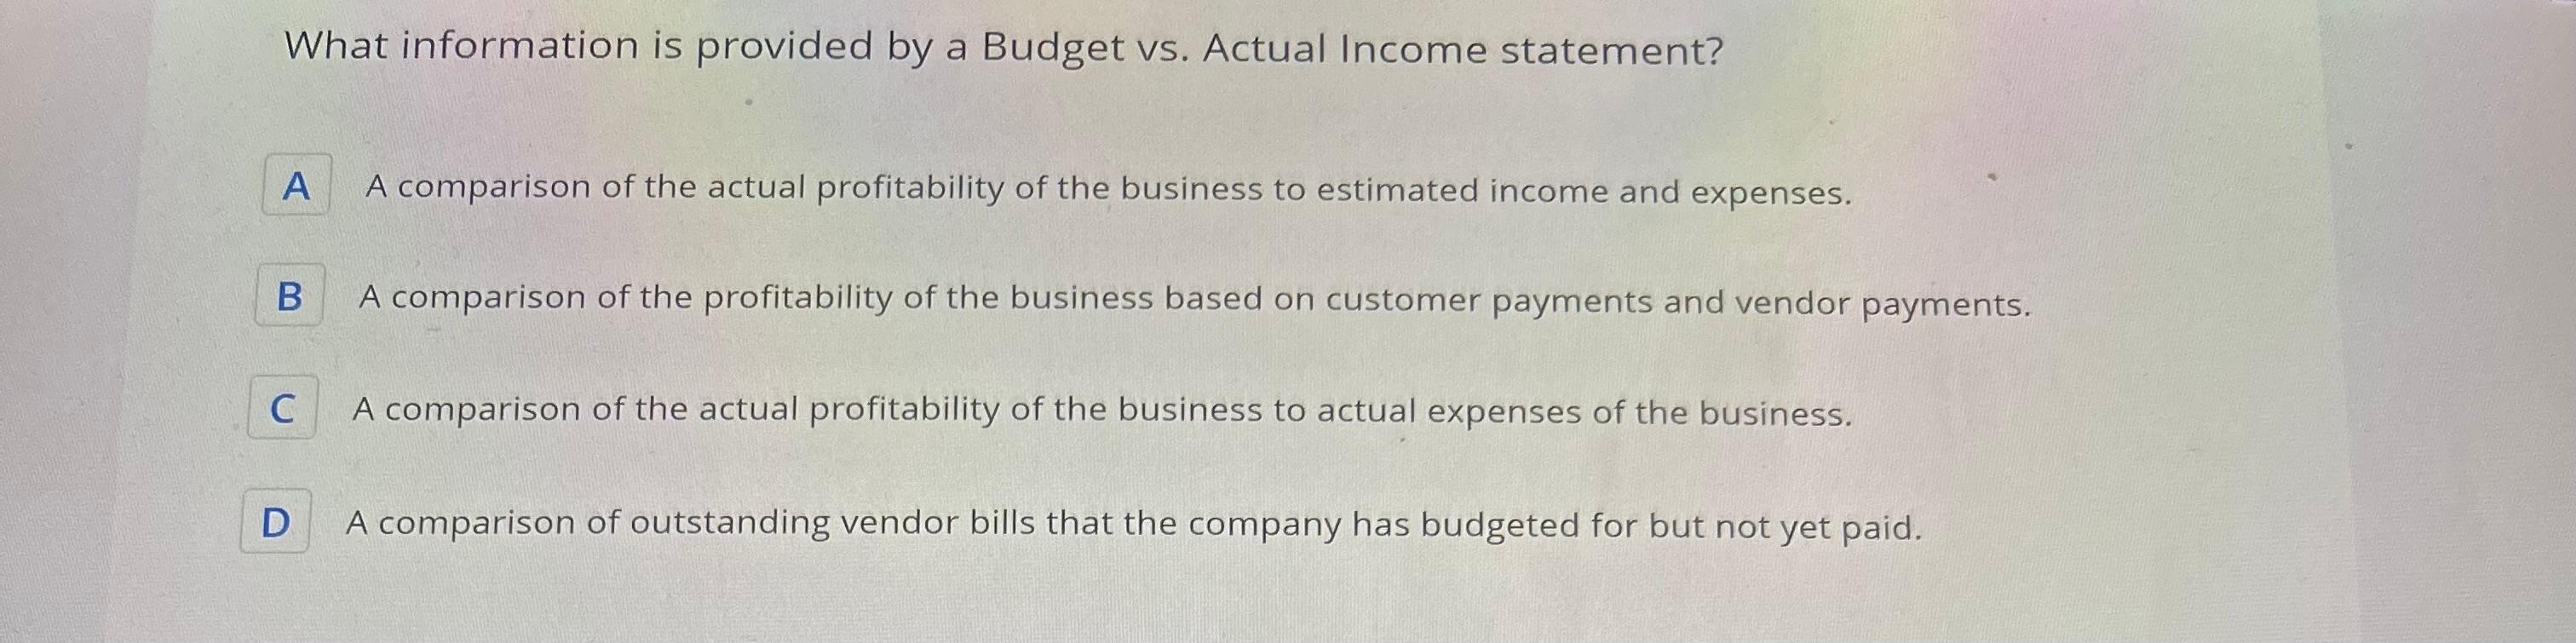 What information is provided by a Budget vs. Actual Income statement? A A comparison of the actual